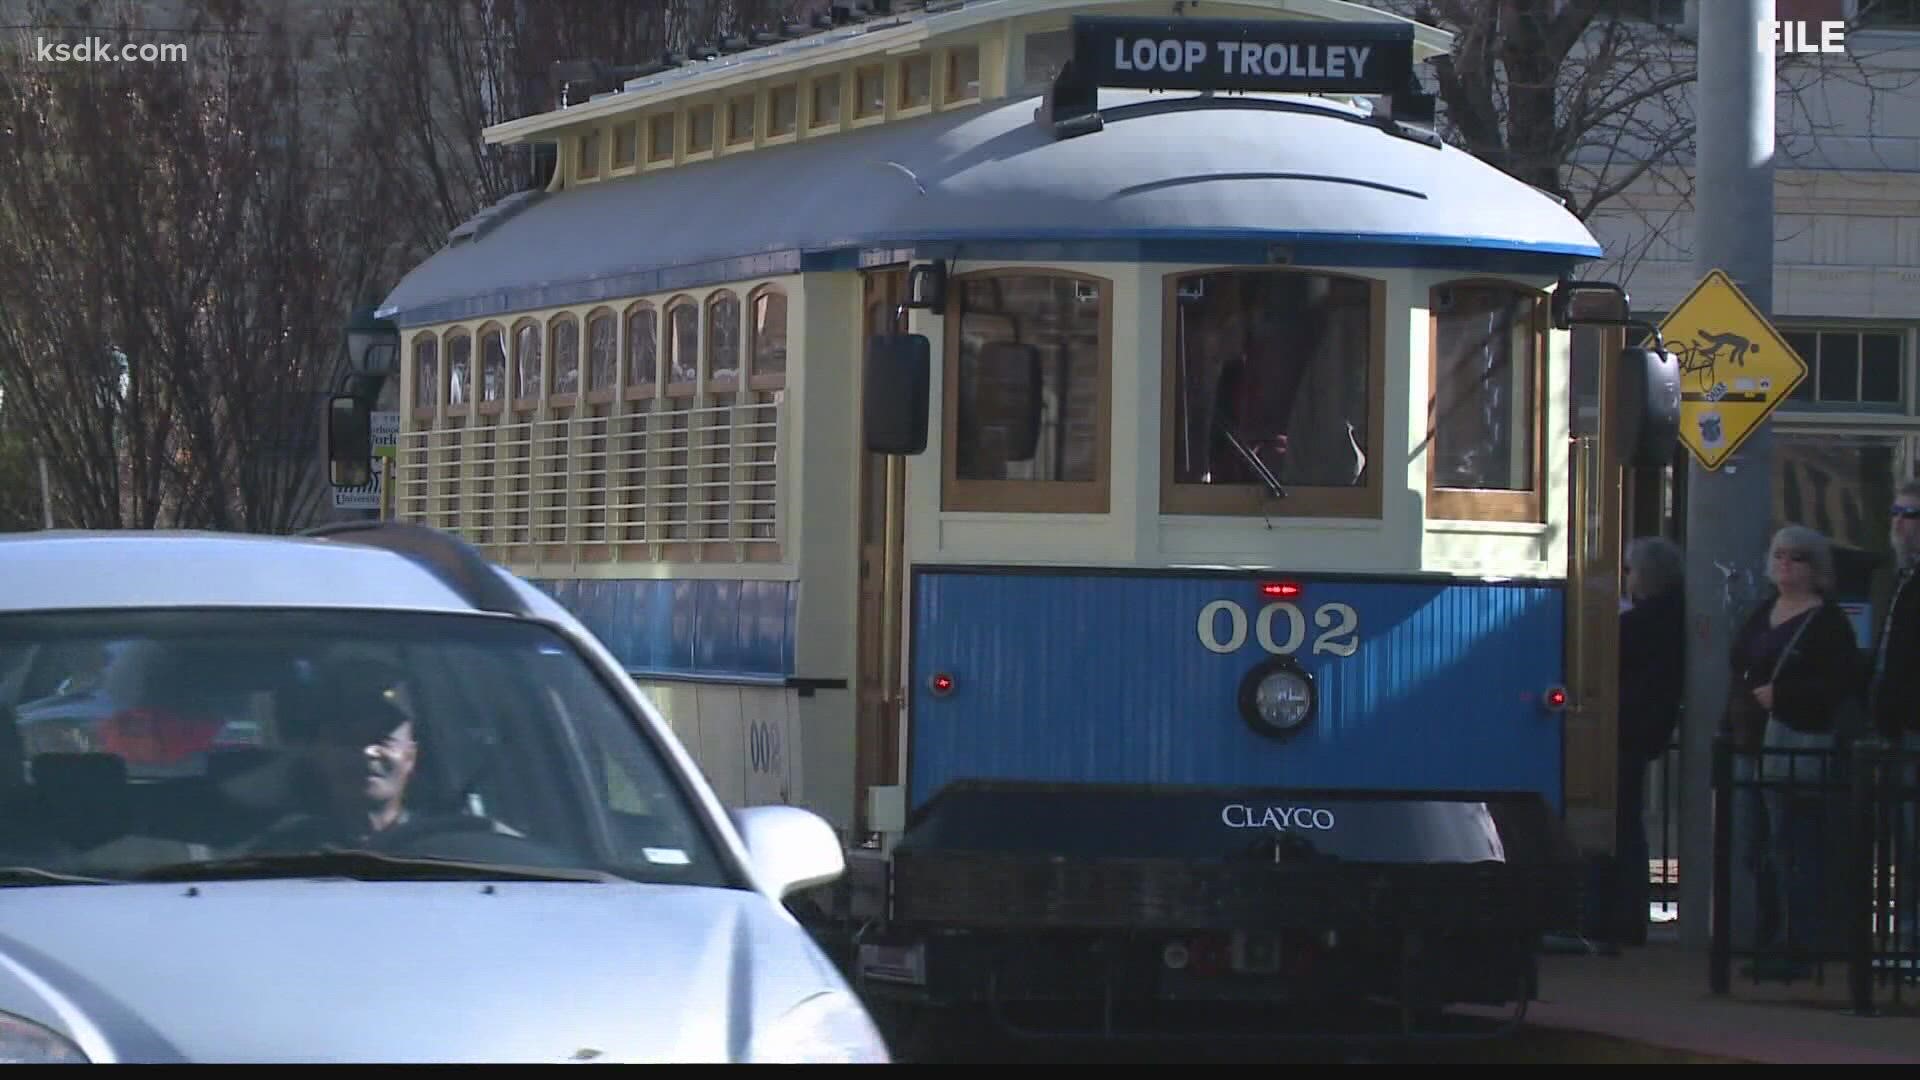 “The St. Louis region hasn’t kept it’s commitment to run the trolley, which was required to receive those funds,” said St. Louis County Executive Sam Page.